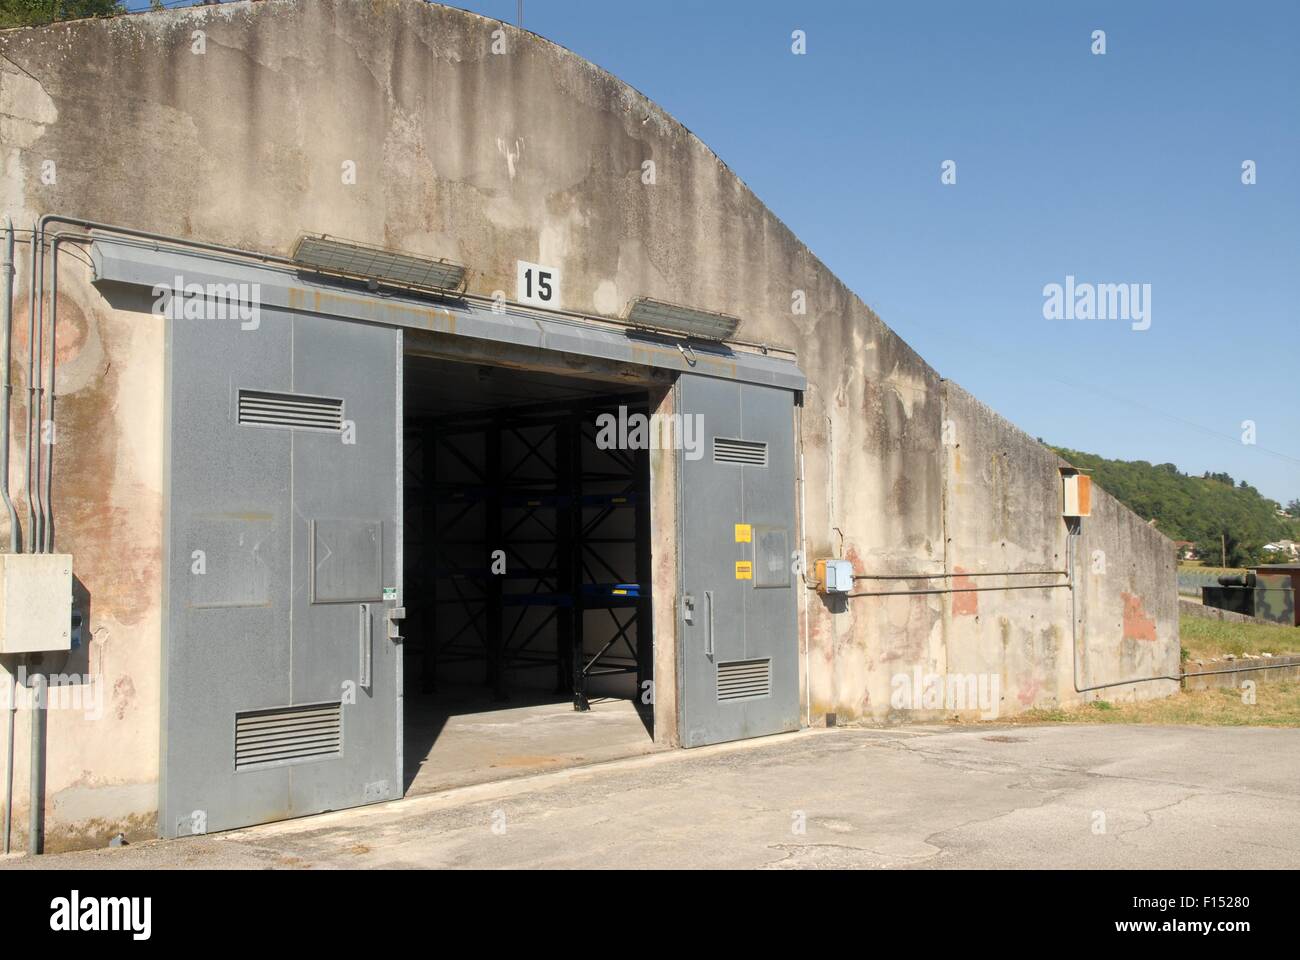 Italy, Camp Ederle US Army base in Vicenza, ammunition ...